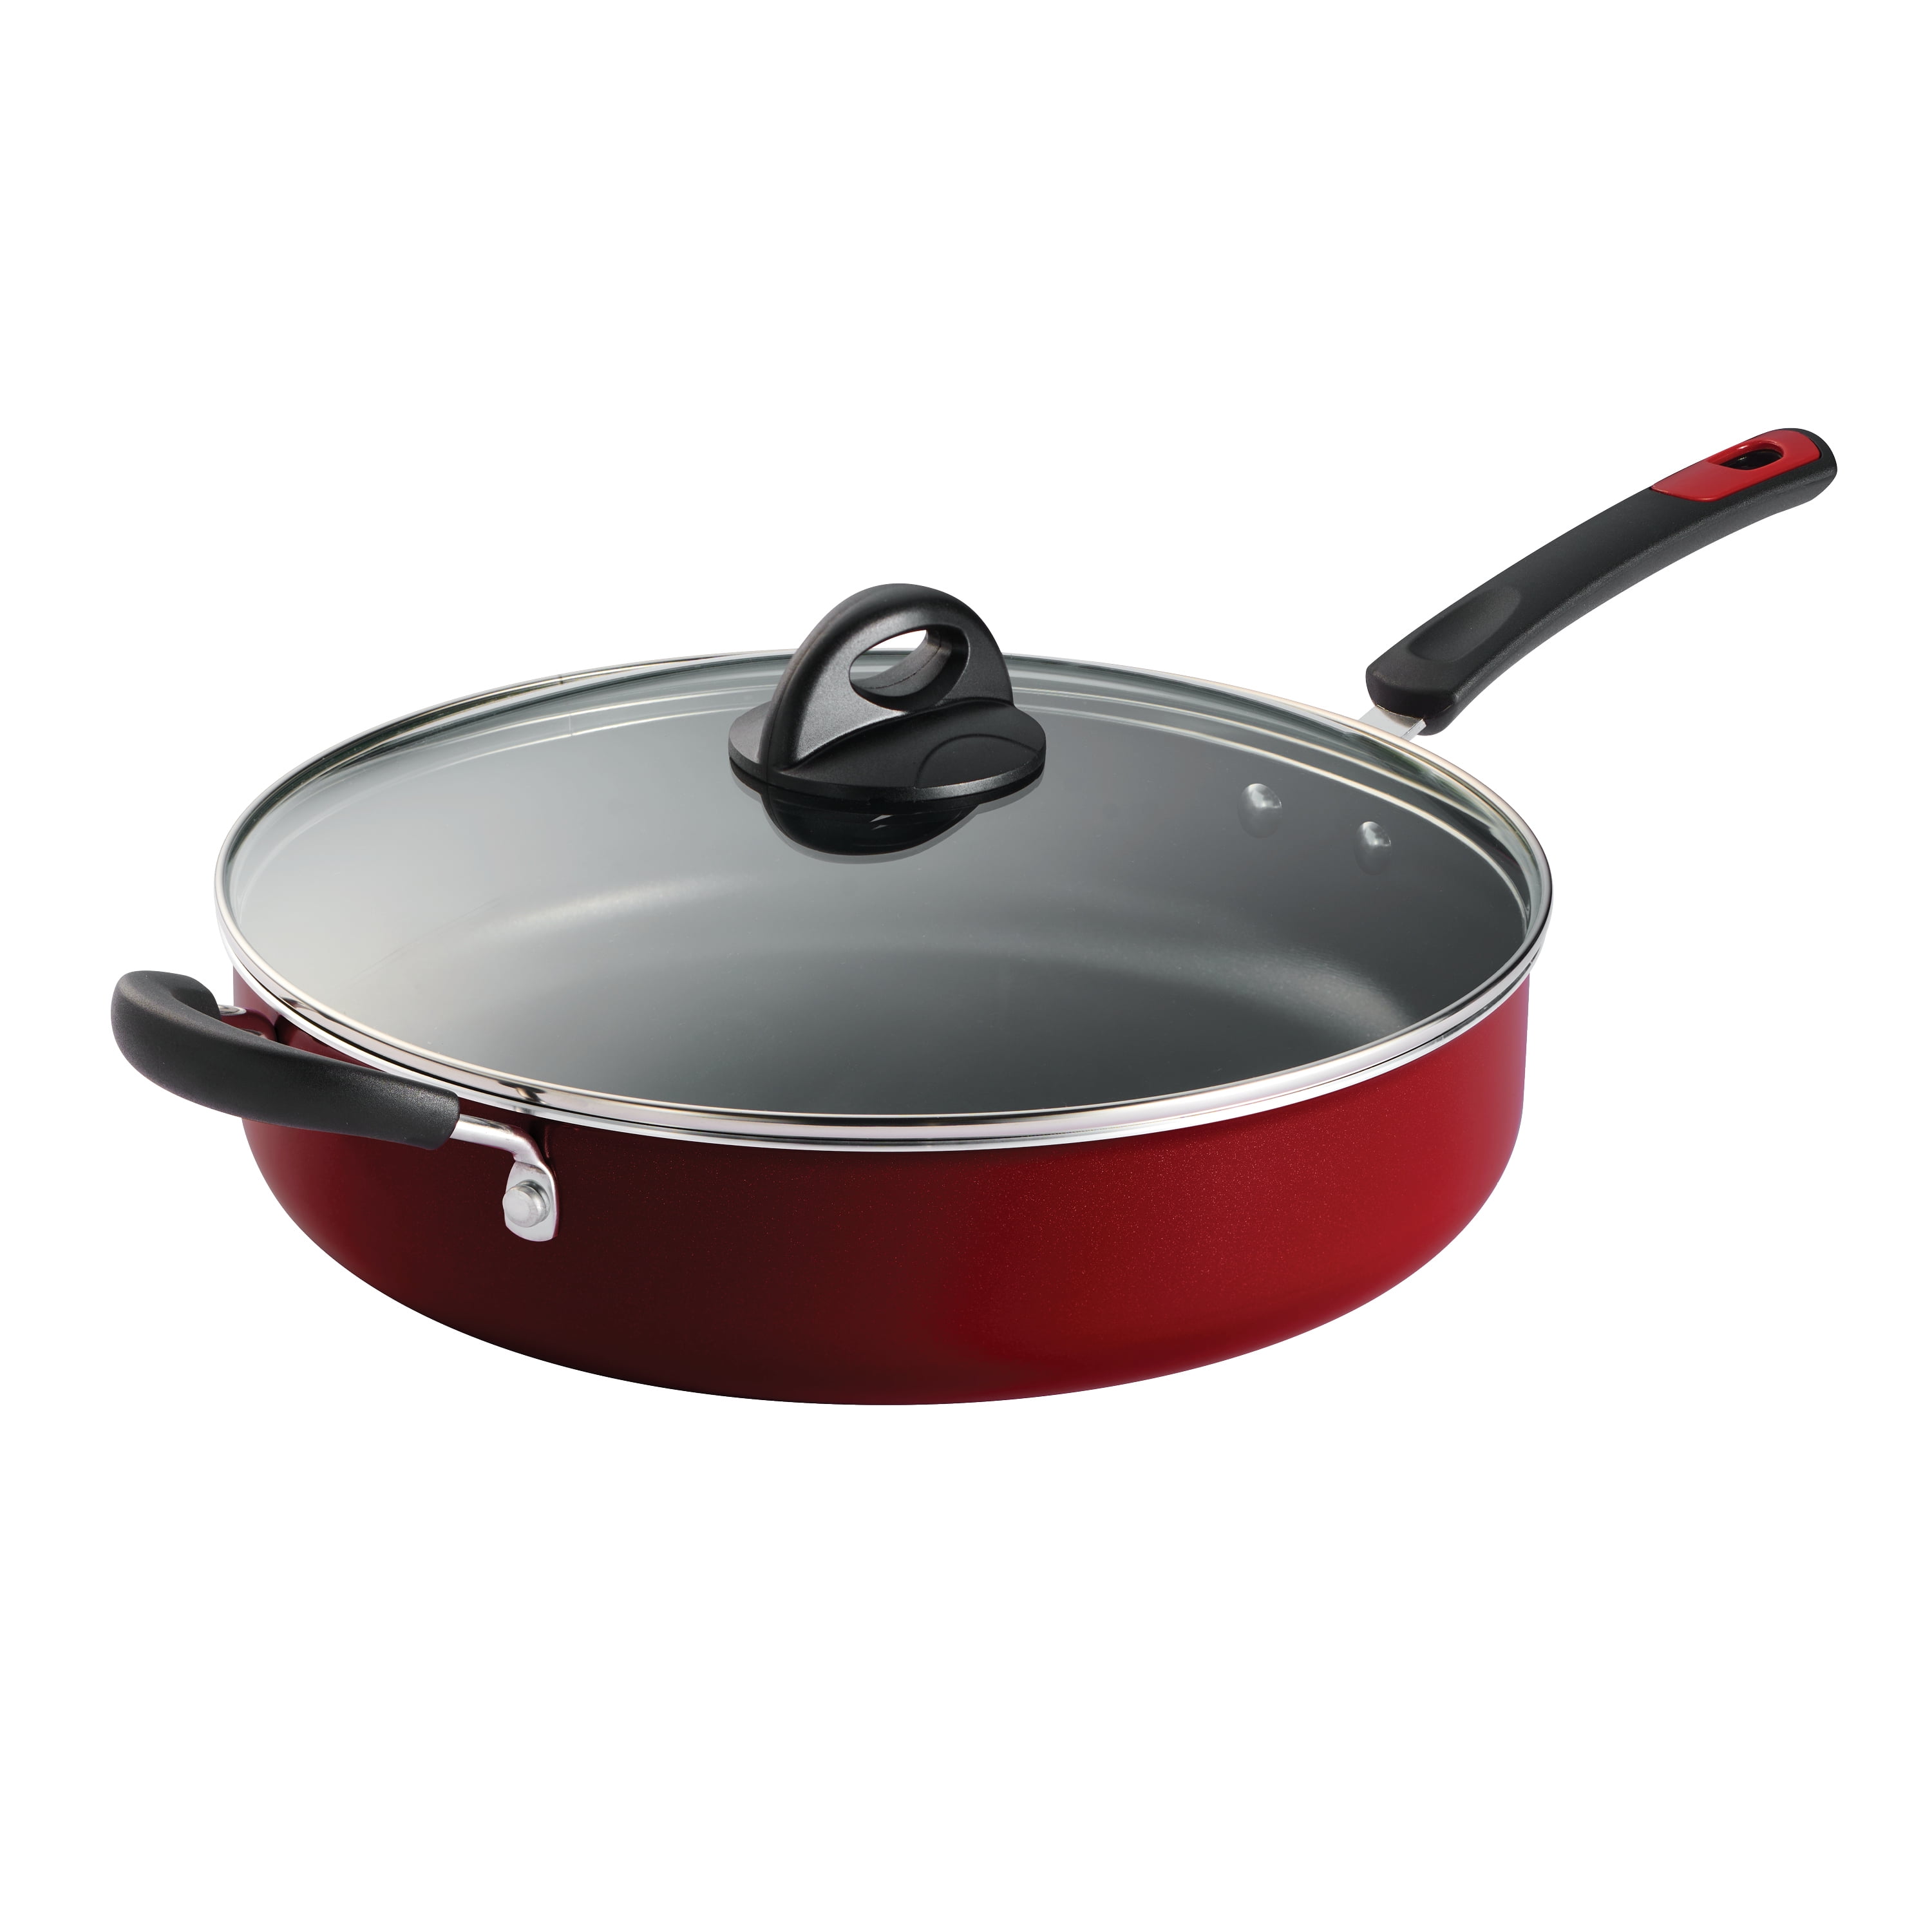 Tramontina EveryDay 5 Qt Aluminum Nonstick Covered Jumbo Cooker – Red ...